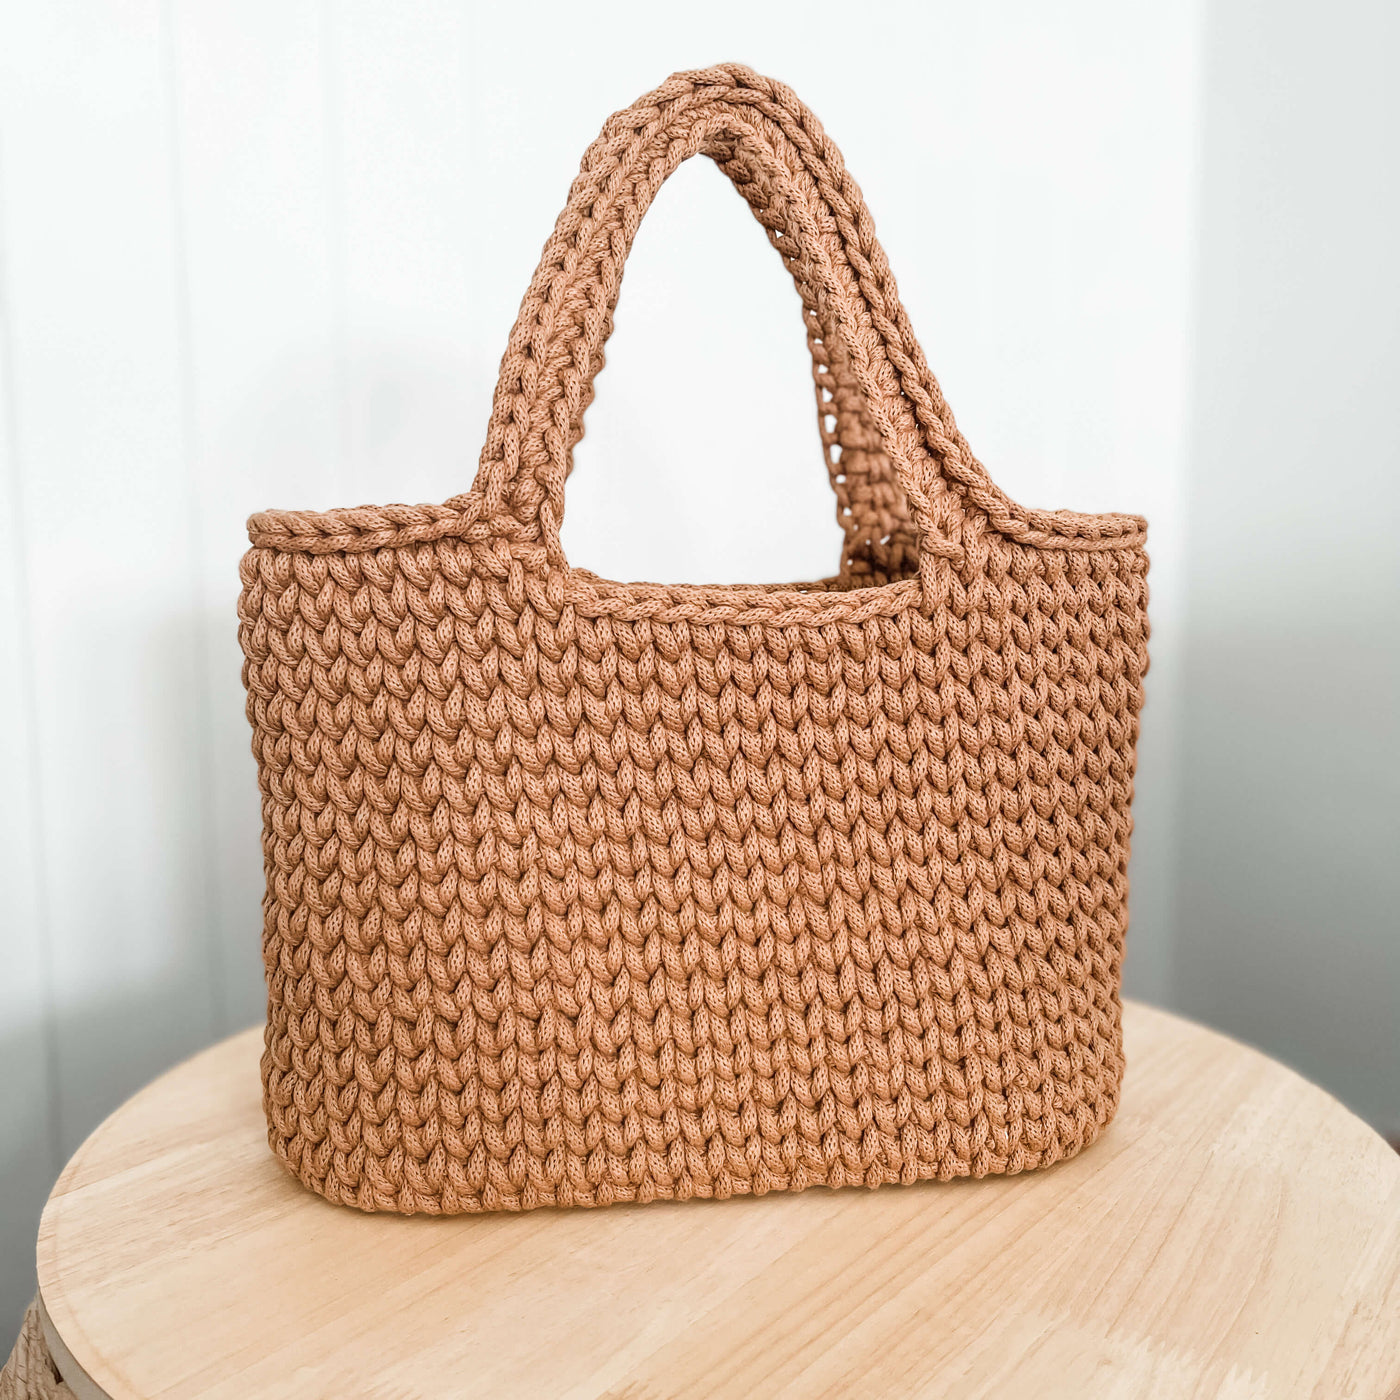 Caramel coloured crochet tote bag with handles sitting on wooden table